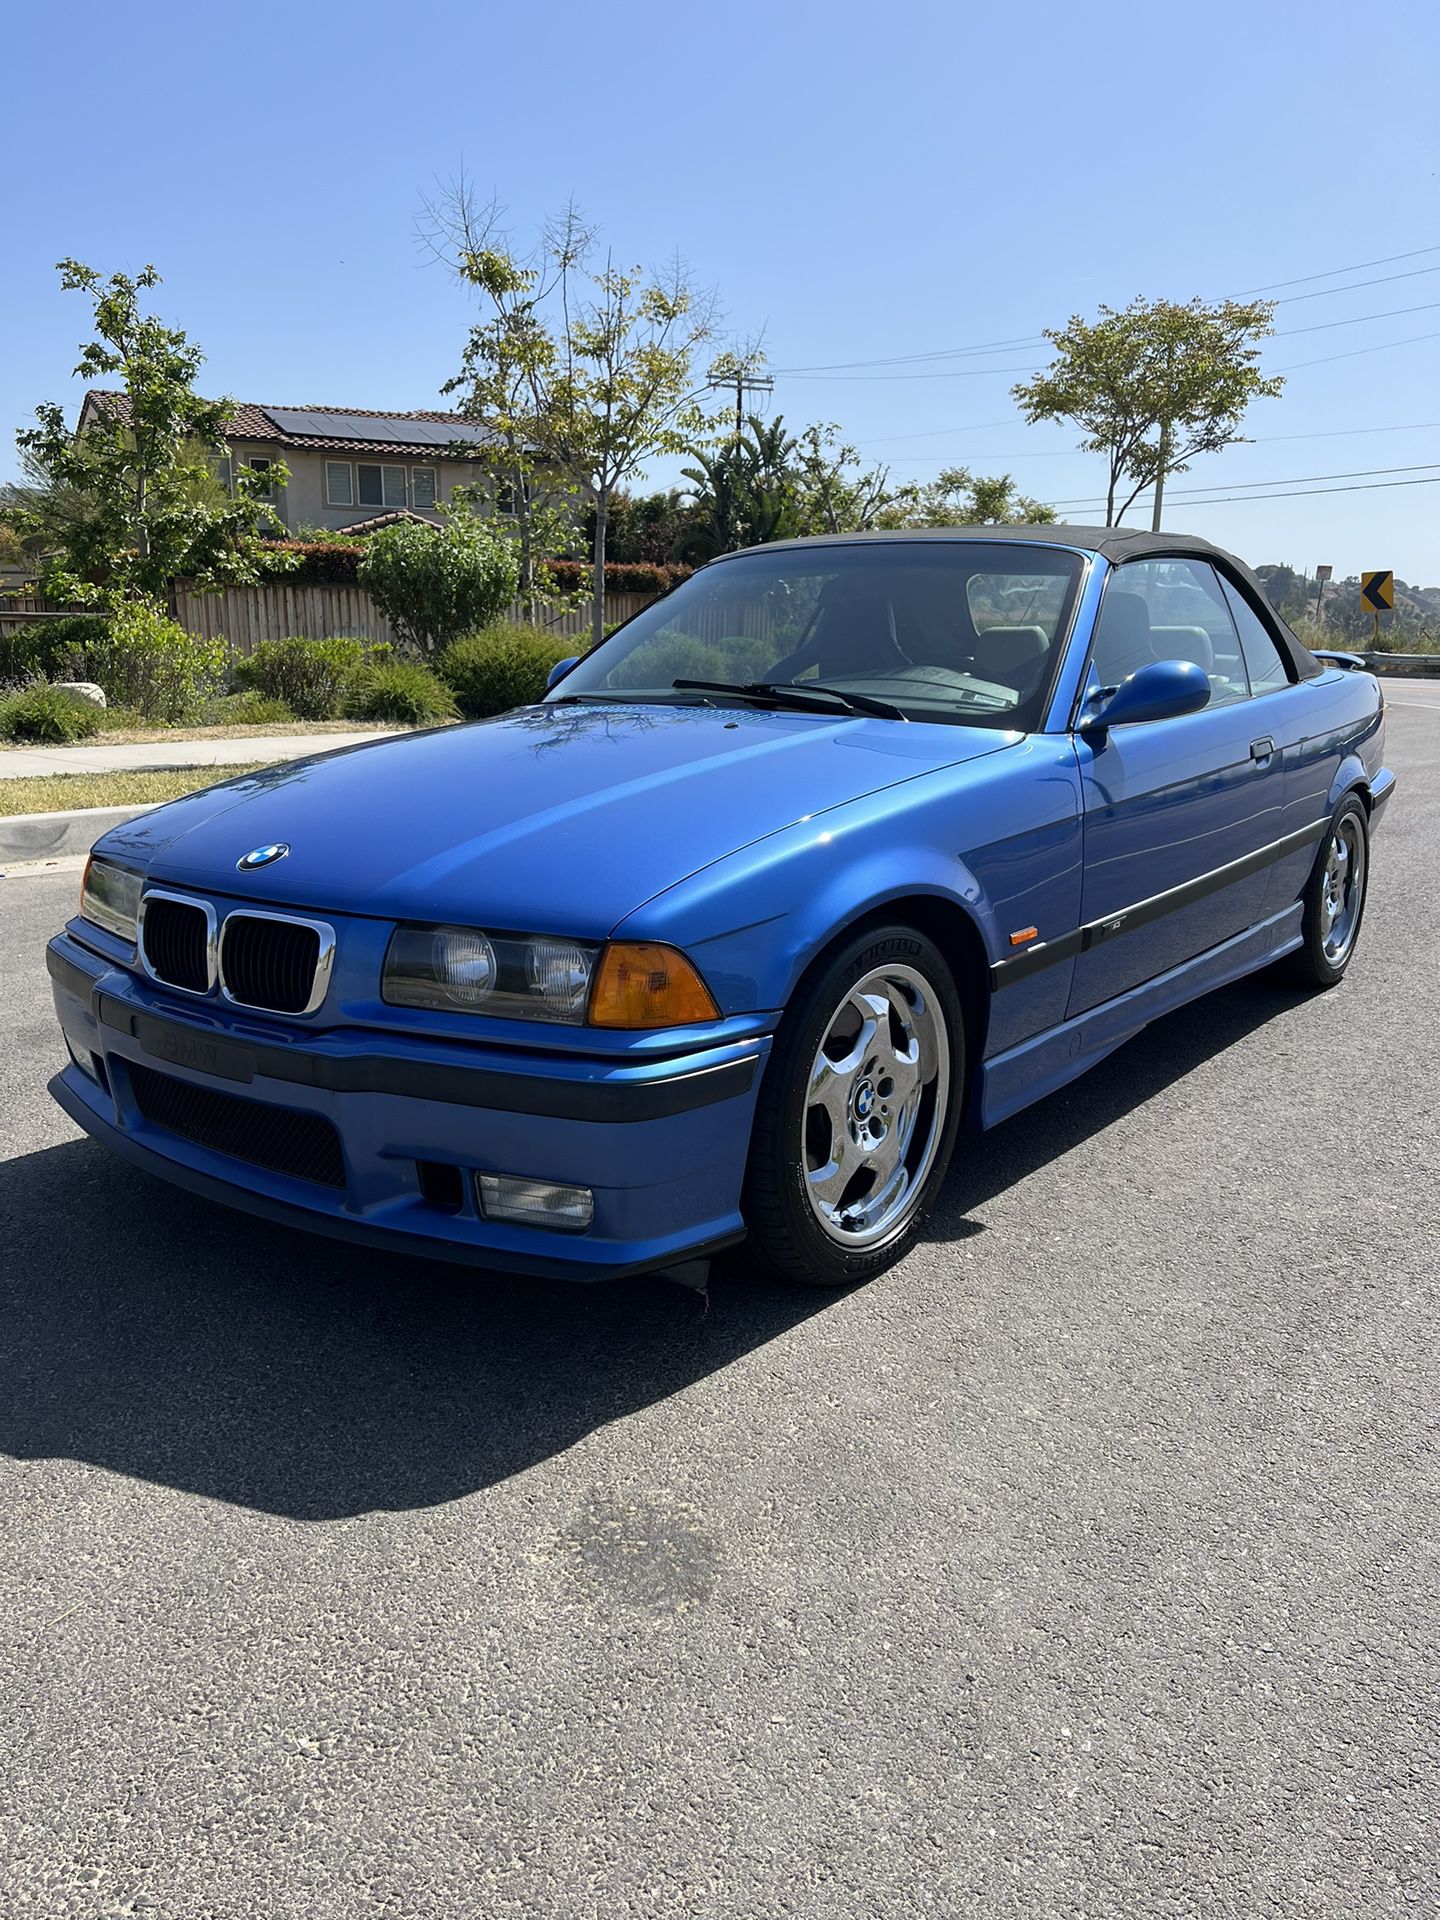 For Sale 1999 BMW E36 M3 Automatic Estoril Blue 2 door convertible in great condition ! 